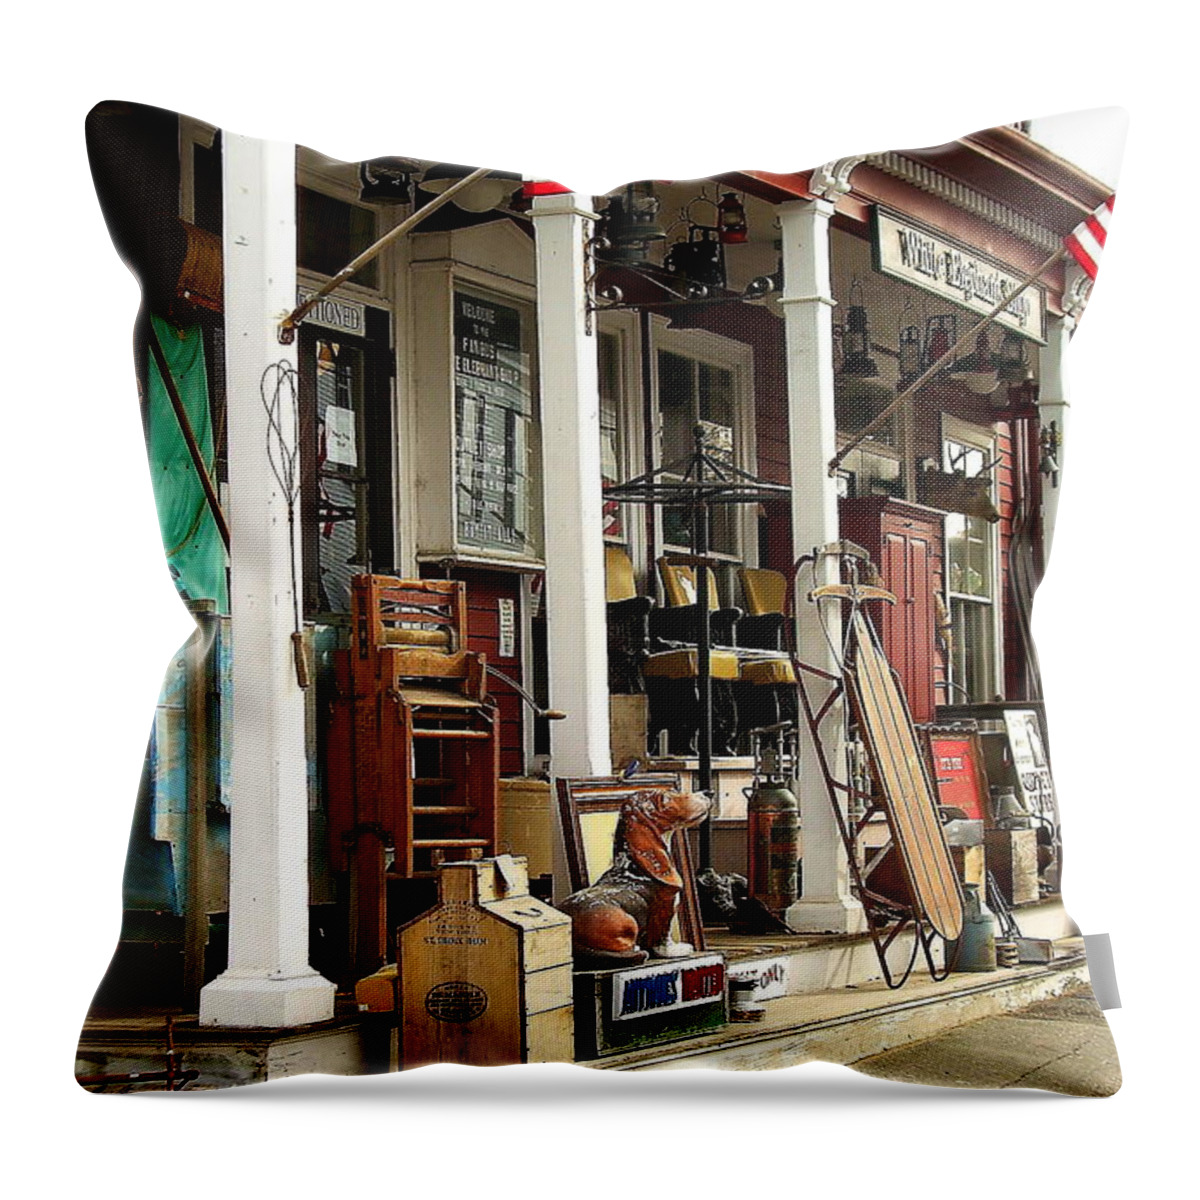 Junk Throw Pillow featuring the photograph White Elephant by Jeff Heimlich